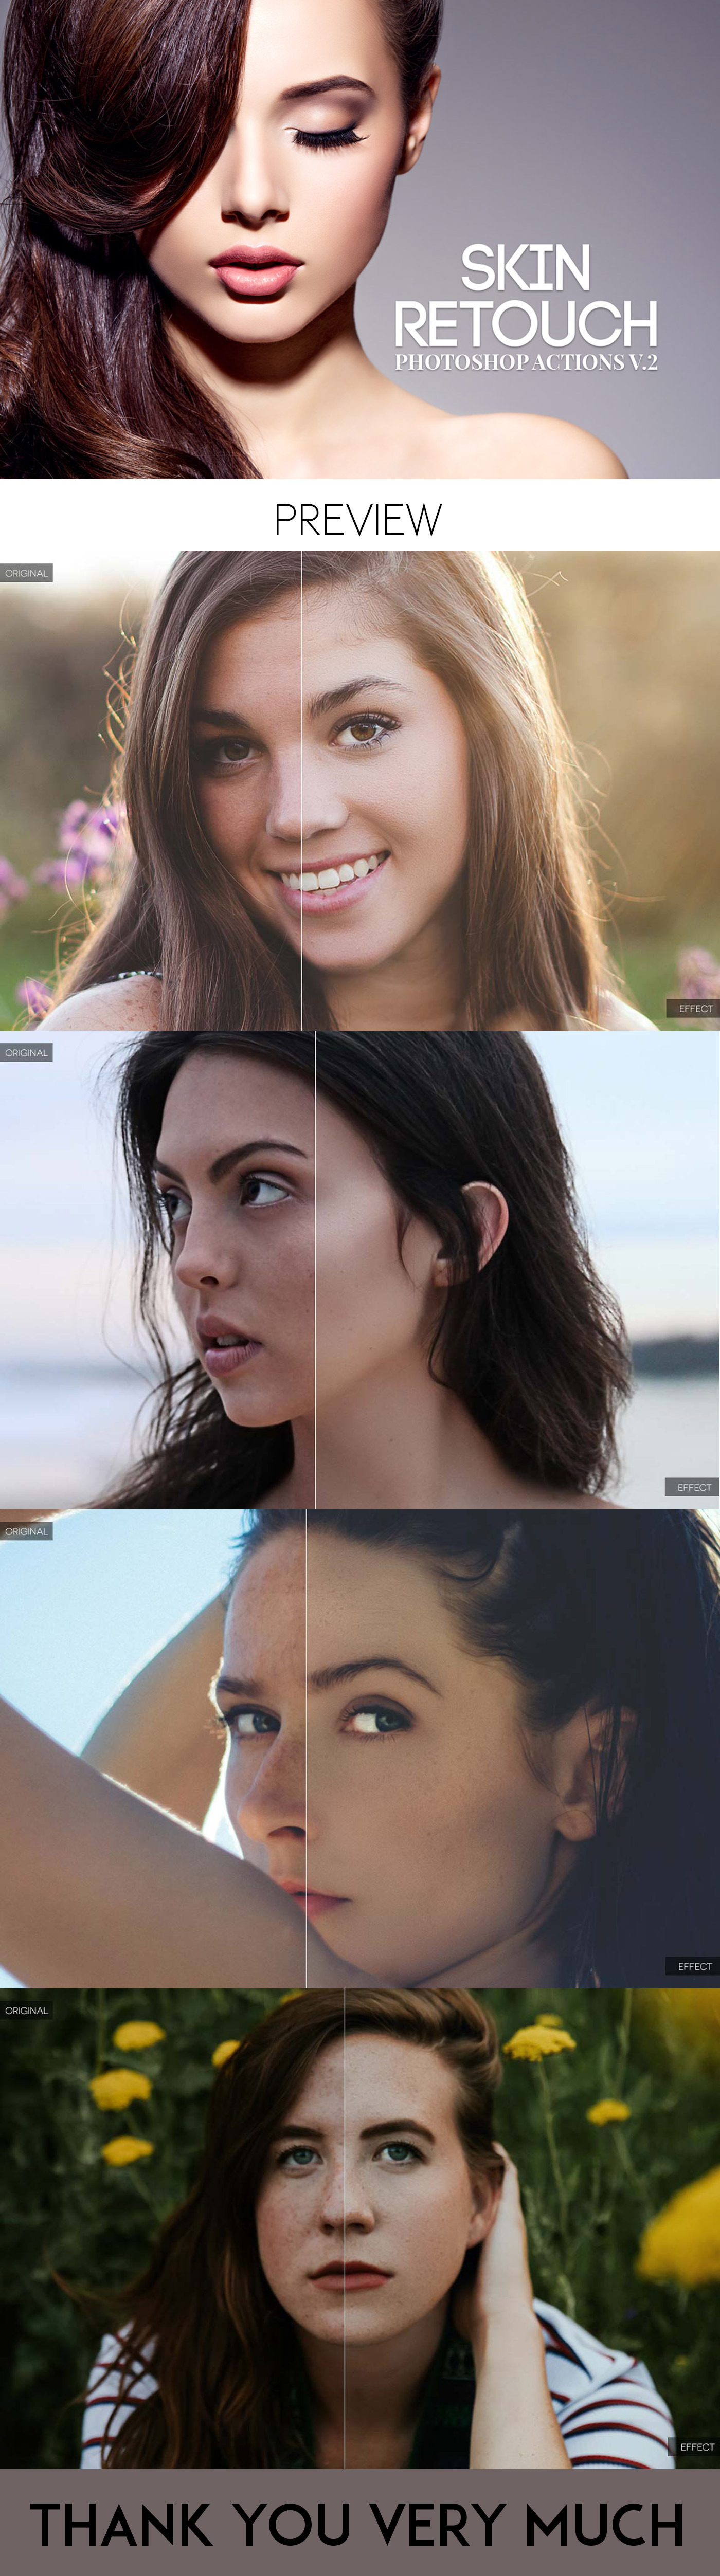 Skin Retouch Photoshop Actions Vol 2 - Actions - 1